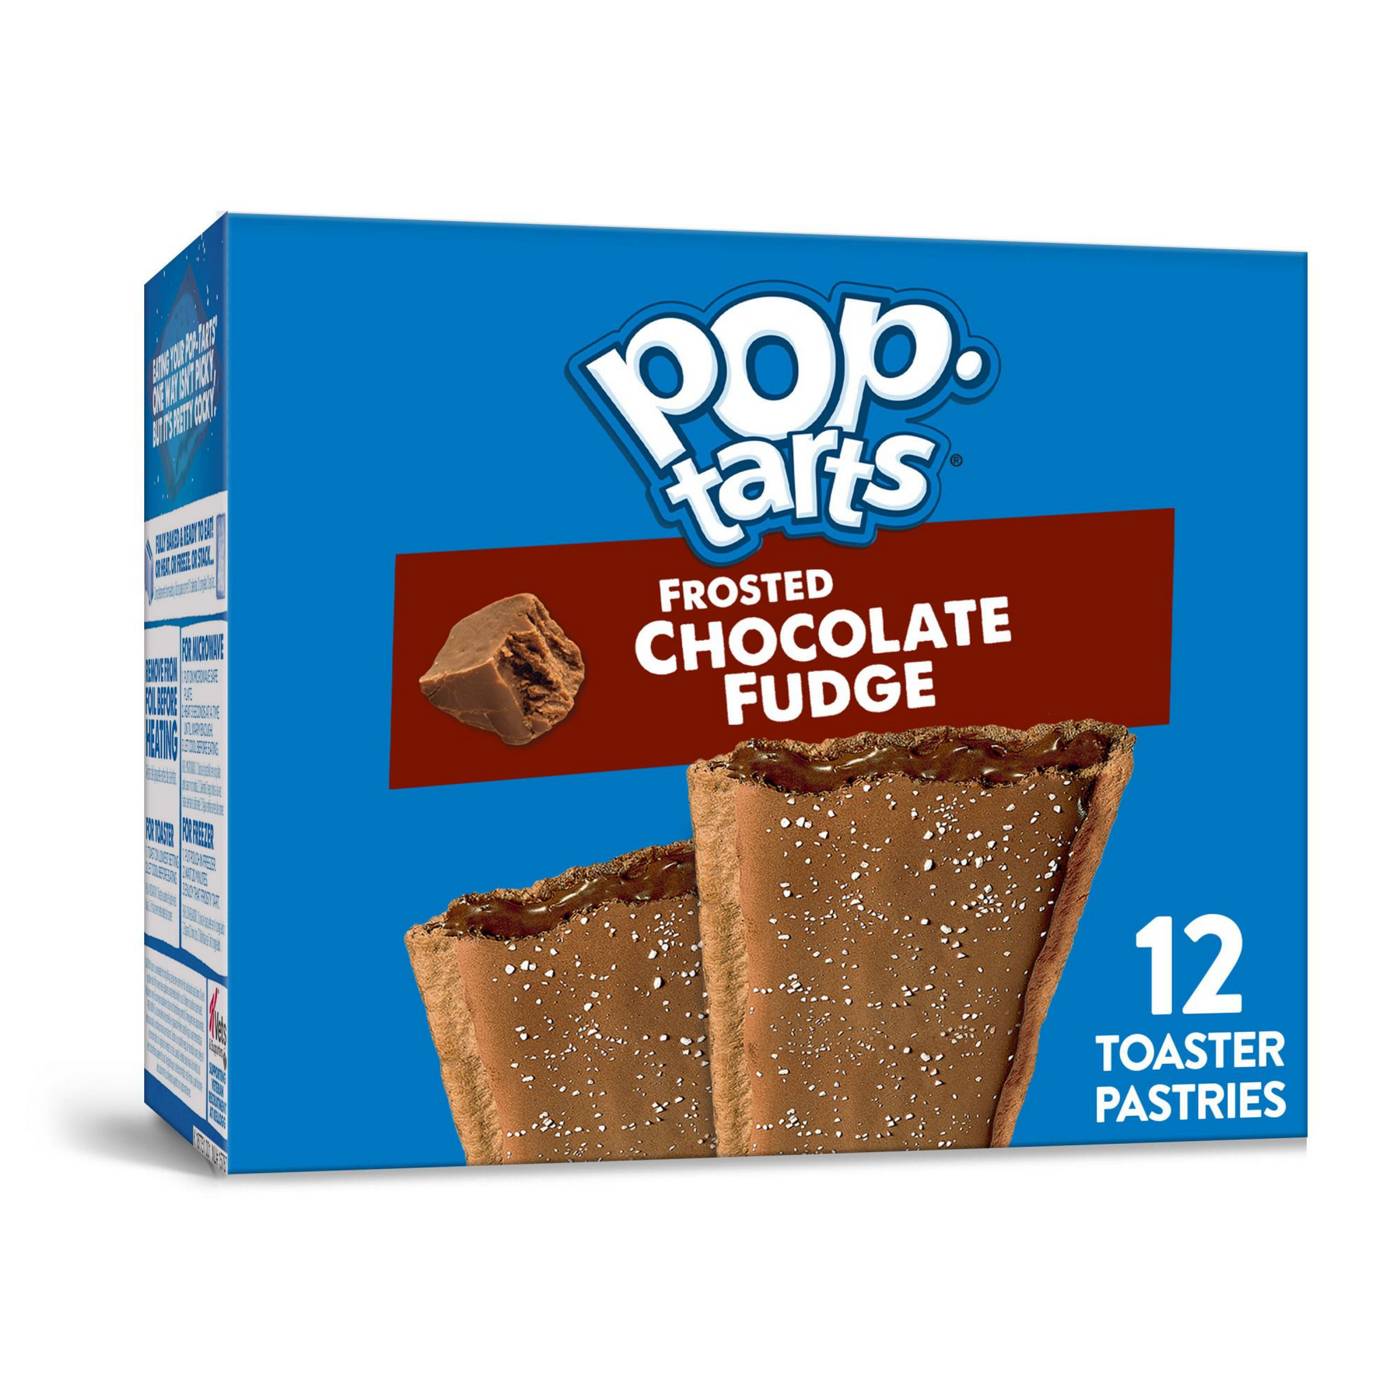 Pop-Tarts Frosted Chocolate Fudge Toaster Pastries; image 1 of 9